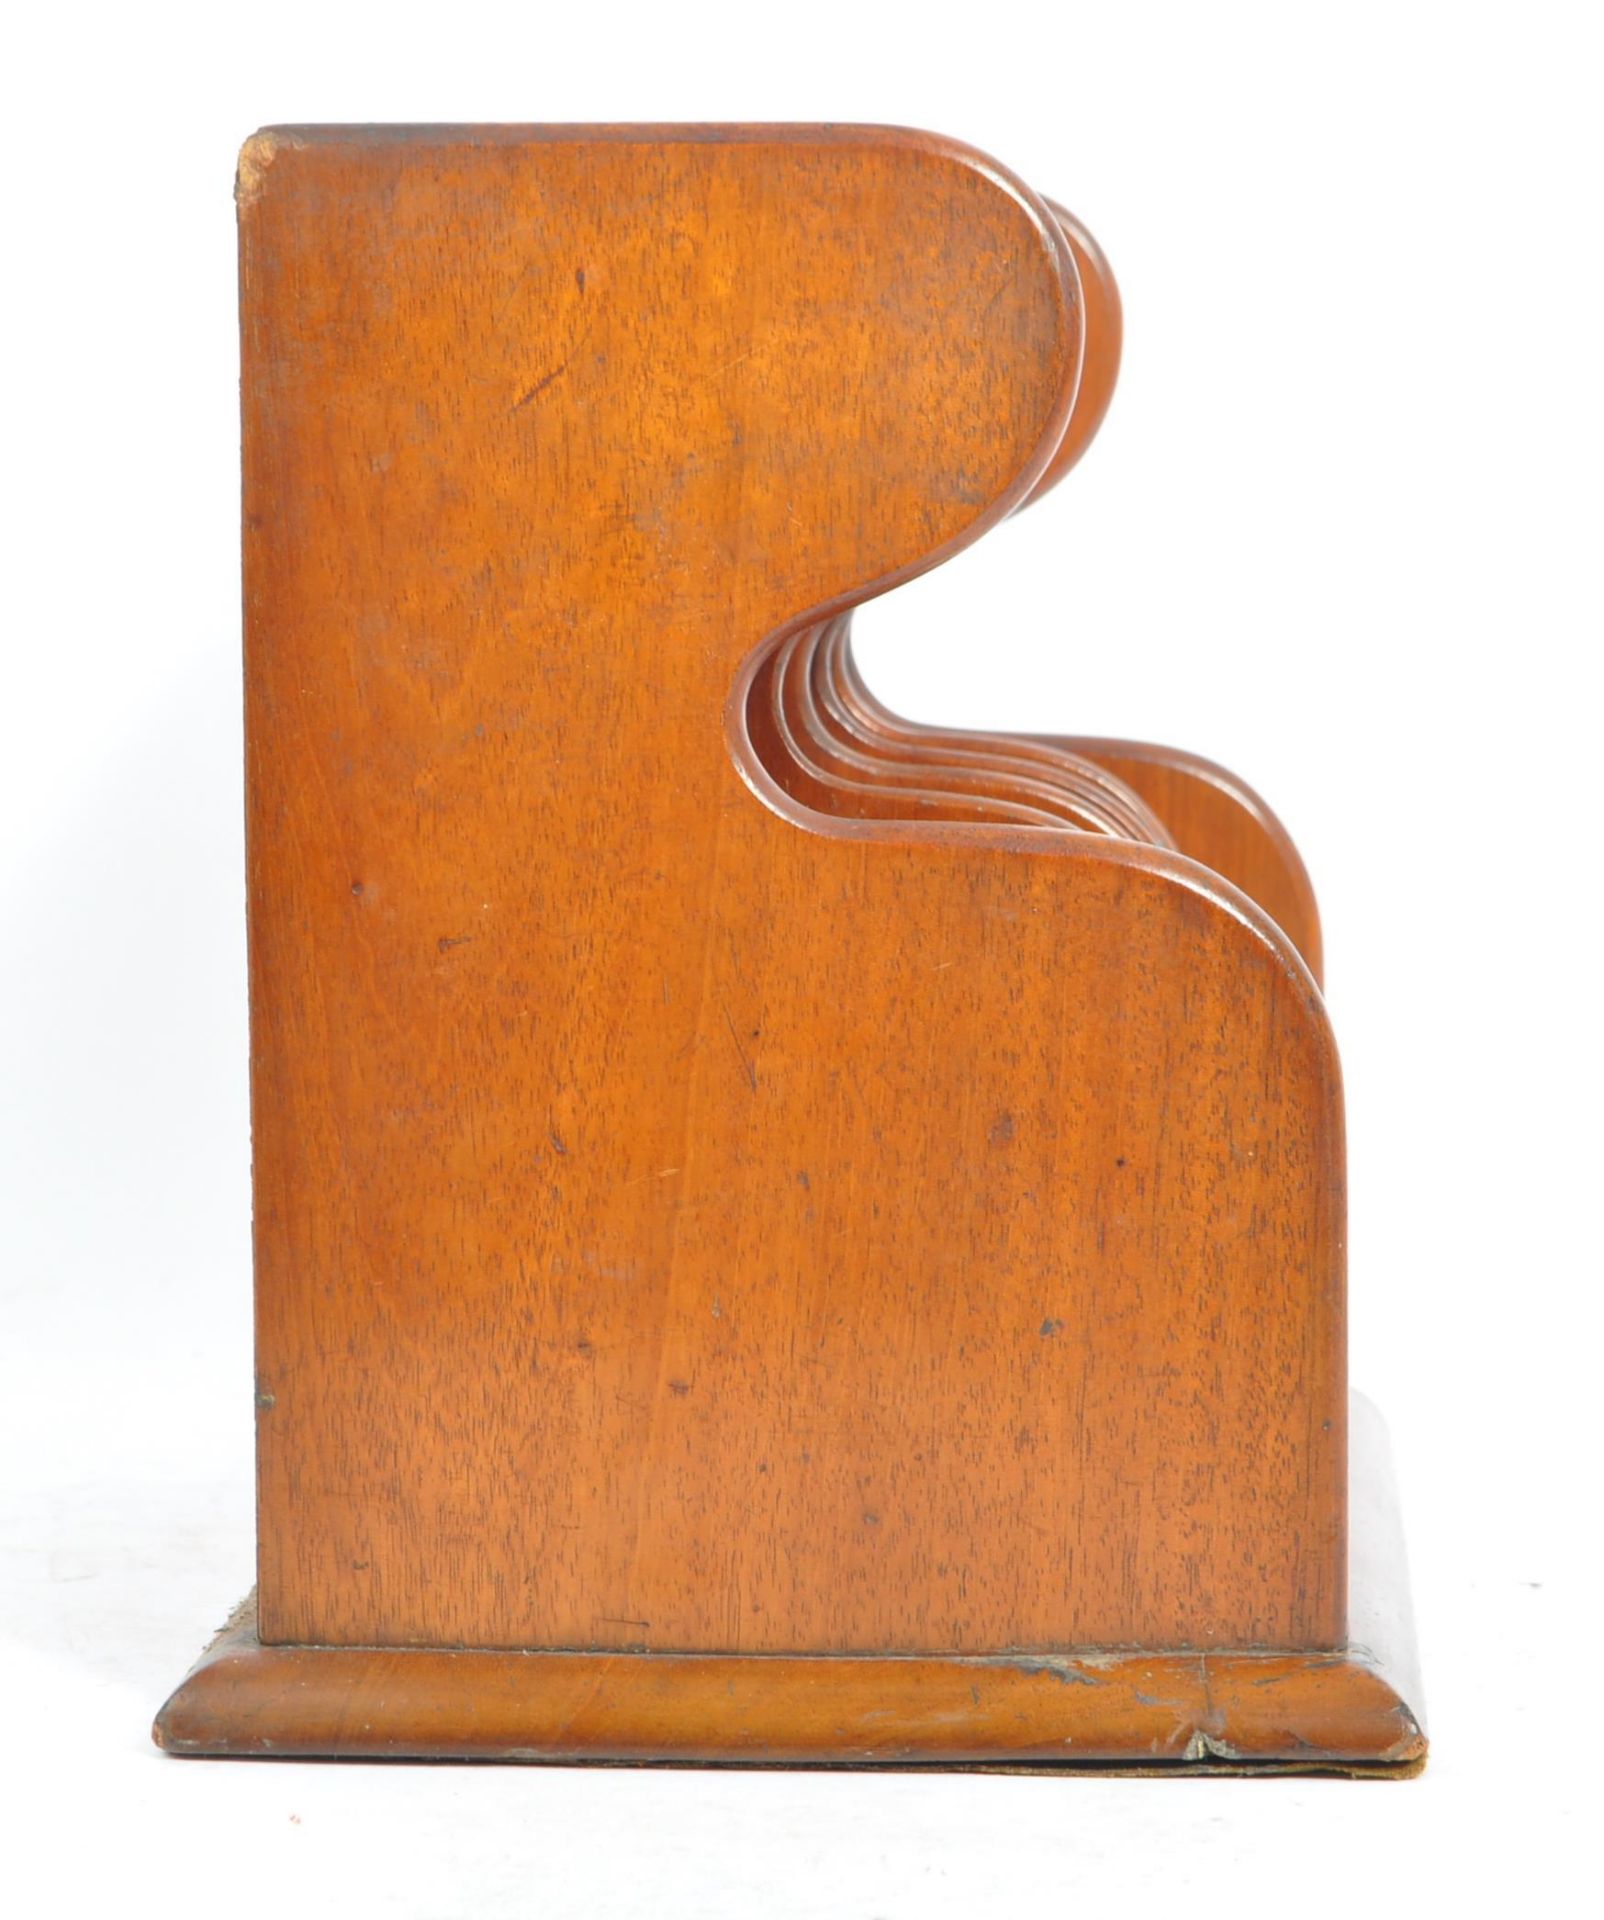 EARLY 20TH CENTURY MAHOGANY WOOD DESK LETTER RACK - Image 5 of 6